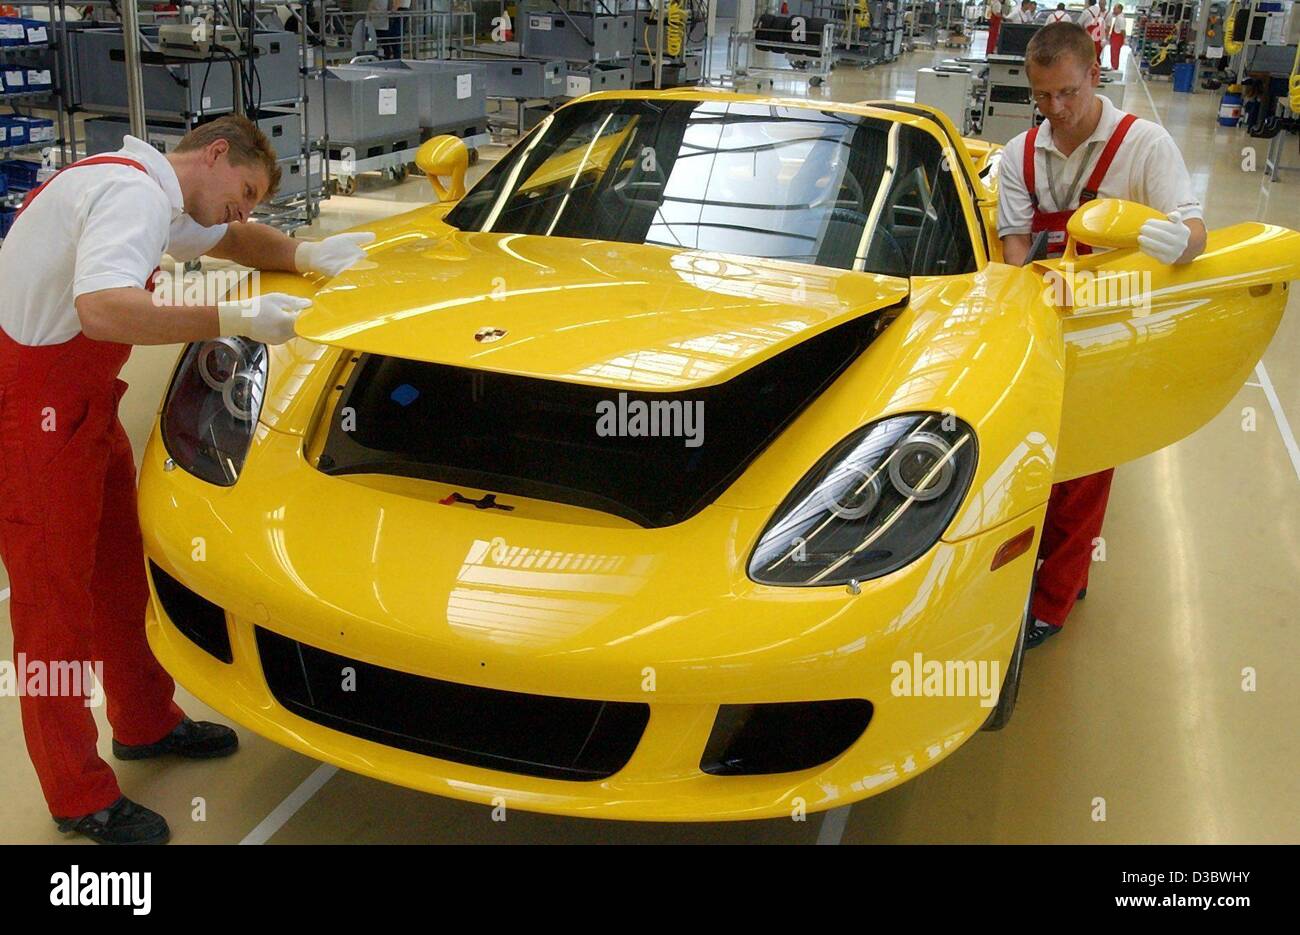 (dpa) - Tilo Becker (L) and Carsten Otto work on the first models of the Porsche Carrera GT at the Porsche factory in Leipzig, Germany, 28 August 2003. The first models are expected to be delivered this autumn. The Carrera will be the race car for the road: it has 612 hp, reaching a maximum speed of Stock Photo